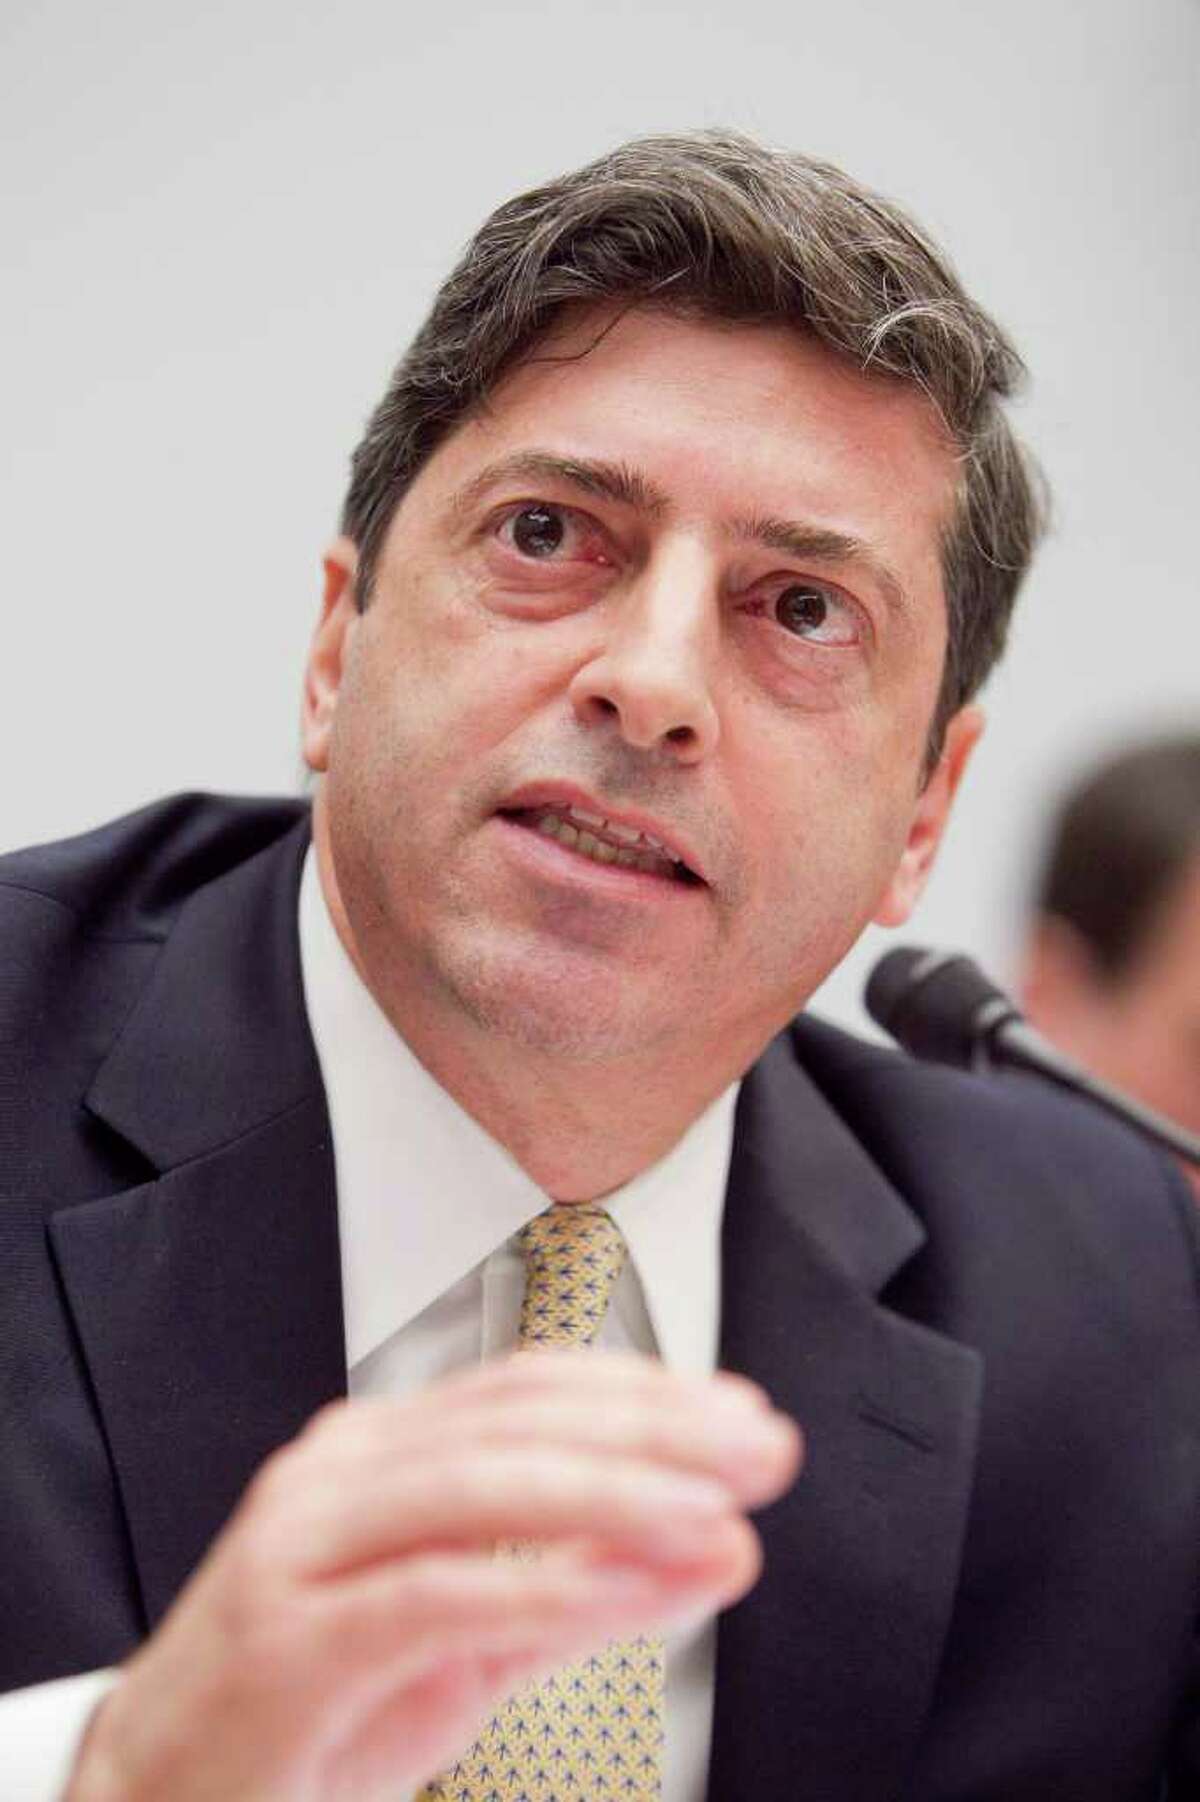 Robert Khuzami, director of the division of enforcement at the U.S. Securities Exchange Commission (SEC), speaks during a House Financial Services Committee hearing on the Stanford ponzi scheme in Washington, D.C., U.S., on Friday, May 13, 2011. The SEC, criticized for missing indicted financier R. Allen Stanford's alleged $7 billion fraud, said it will decide in the near future whether victims should collect federal brokerage insurance. Photographer: Andrew Harrer/Bloomberg *** Local Caption *** Robert Khuzami